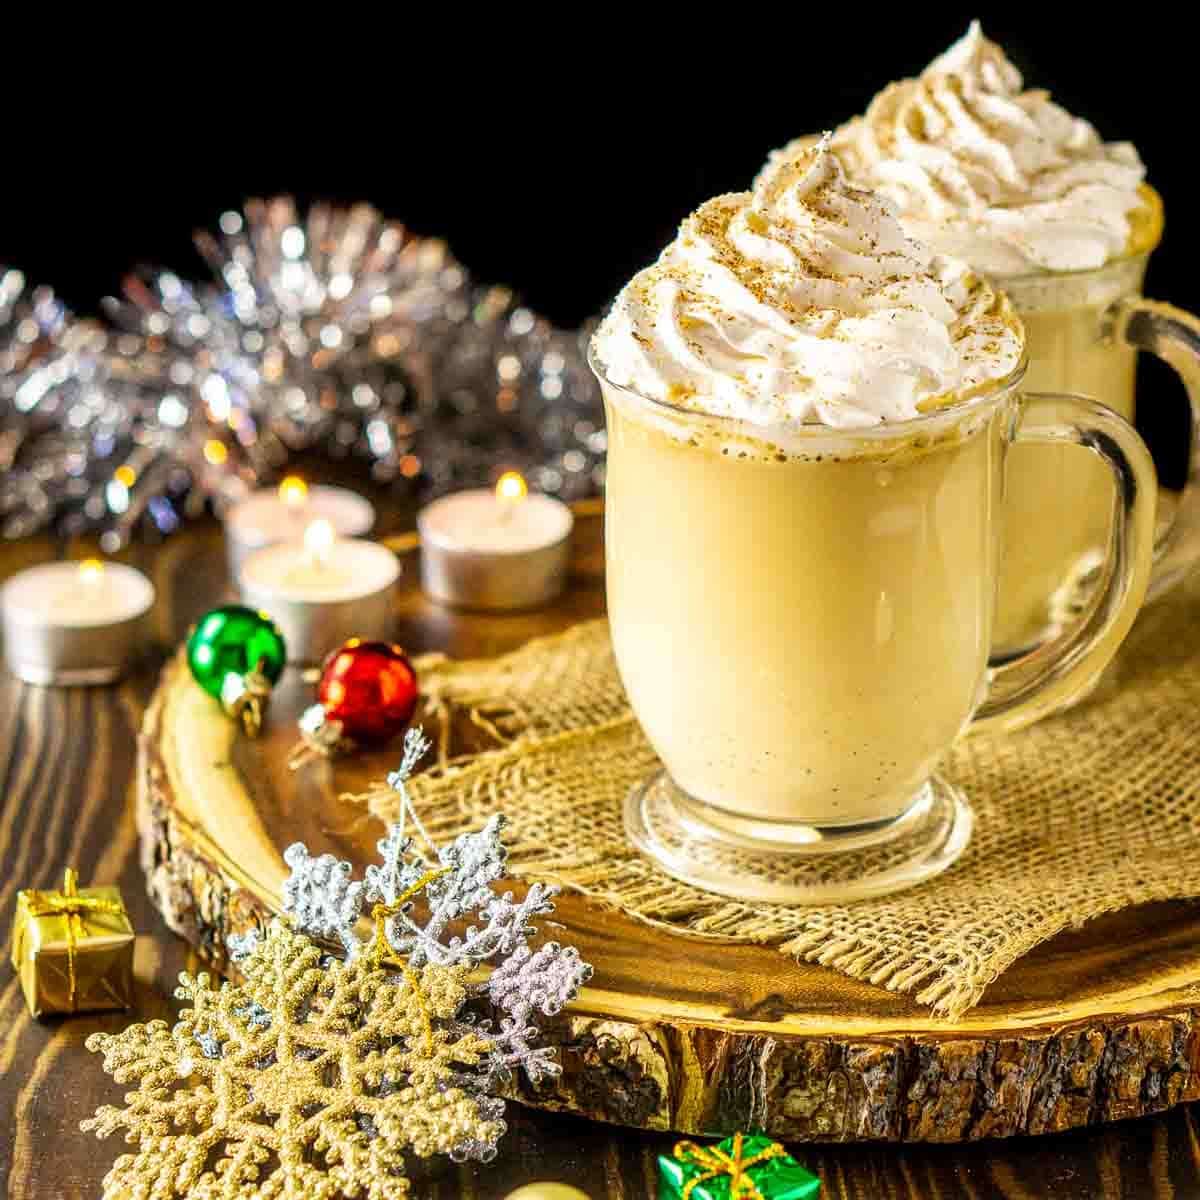 An eggnog latte on a wooden serving platter with Christmas decor around it.